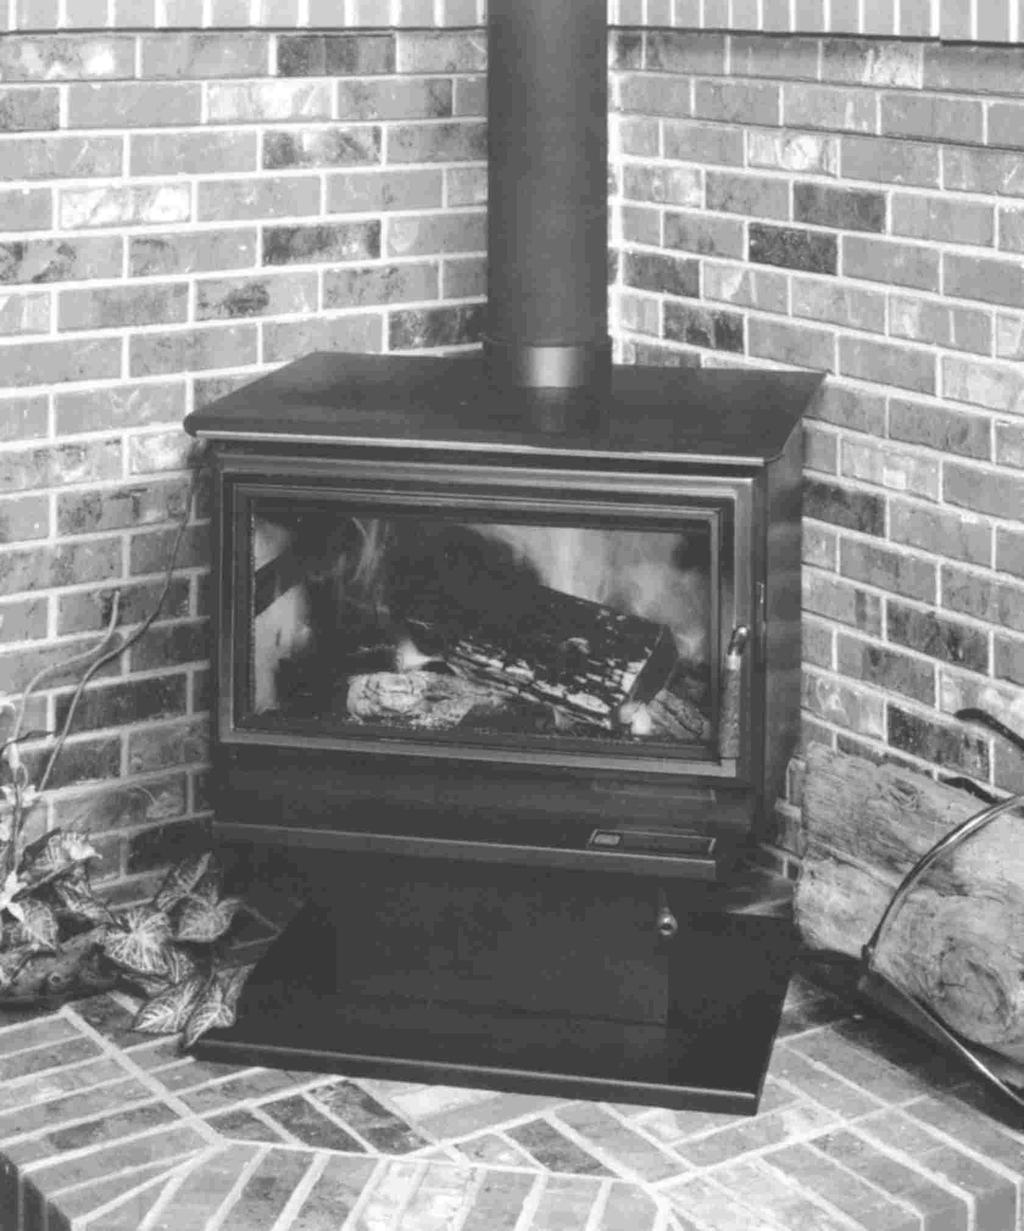 The Briarwood By Blaze King Model BRII/90 Solid Fuel Heater Residential and